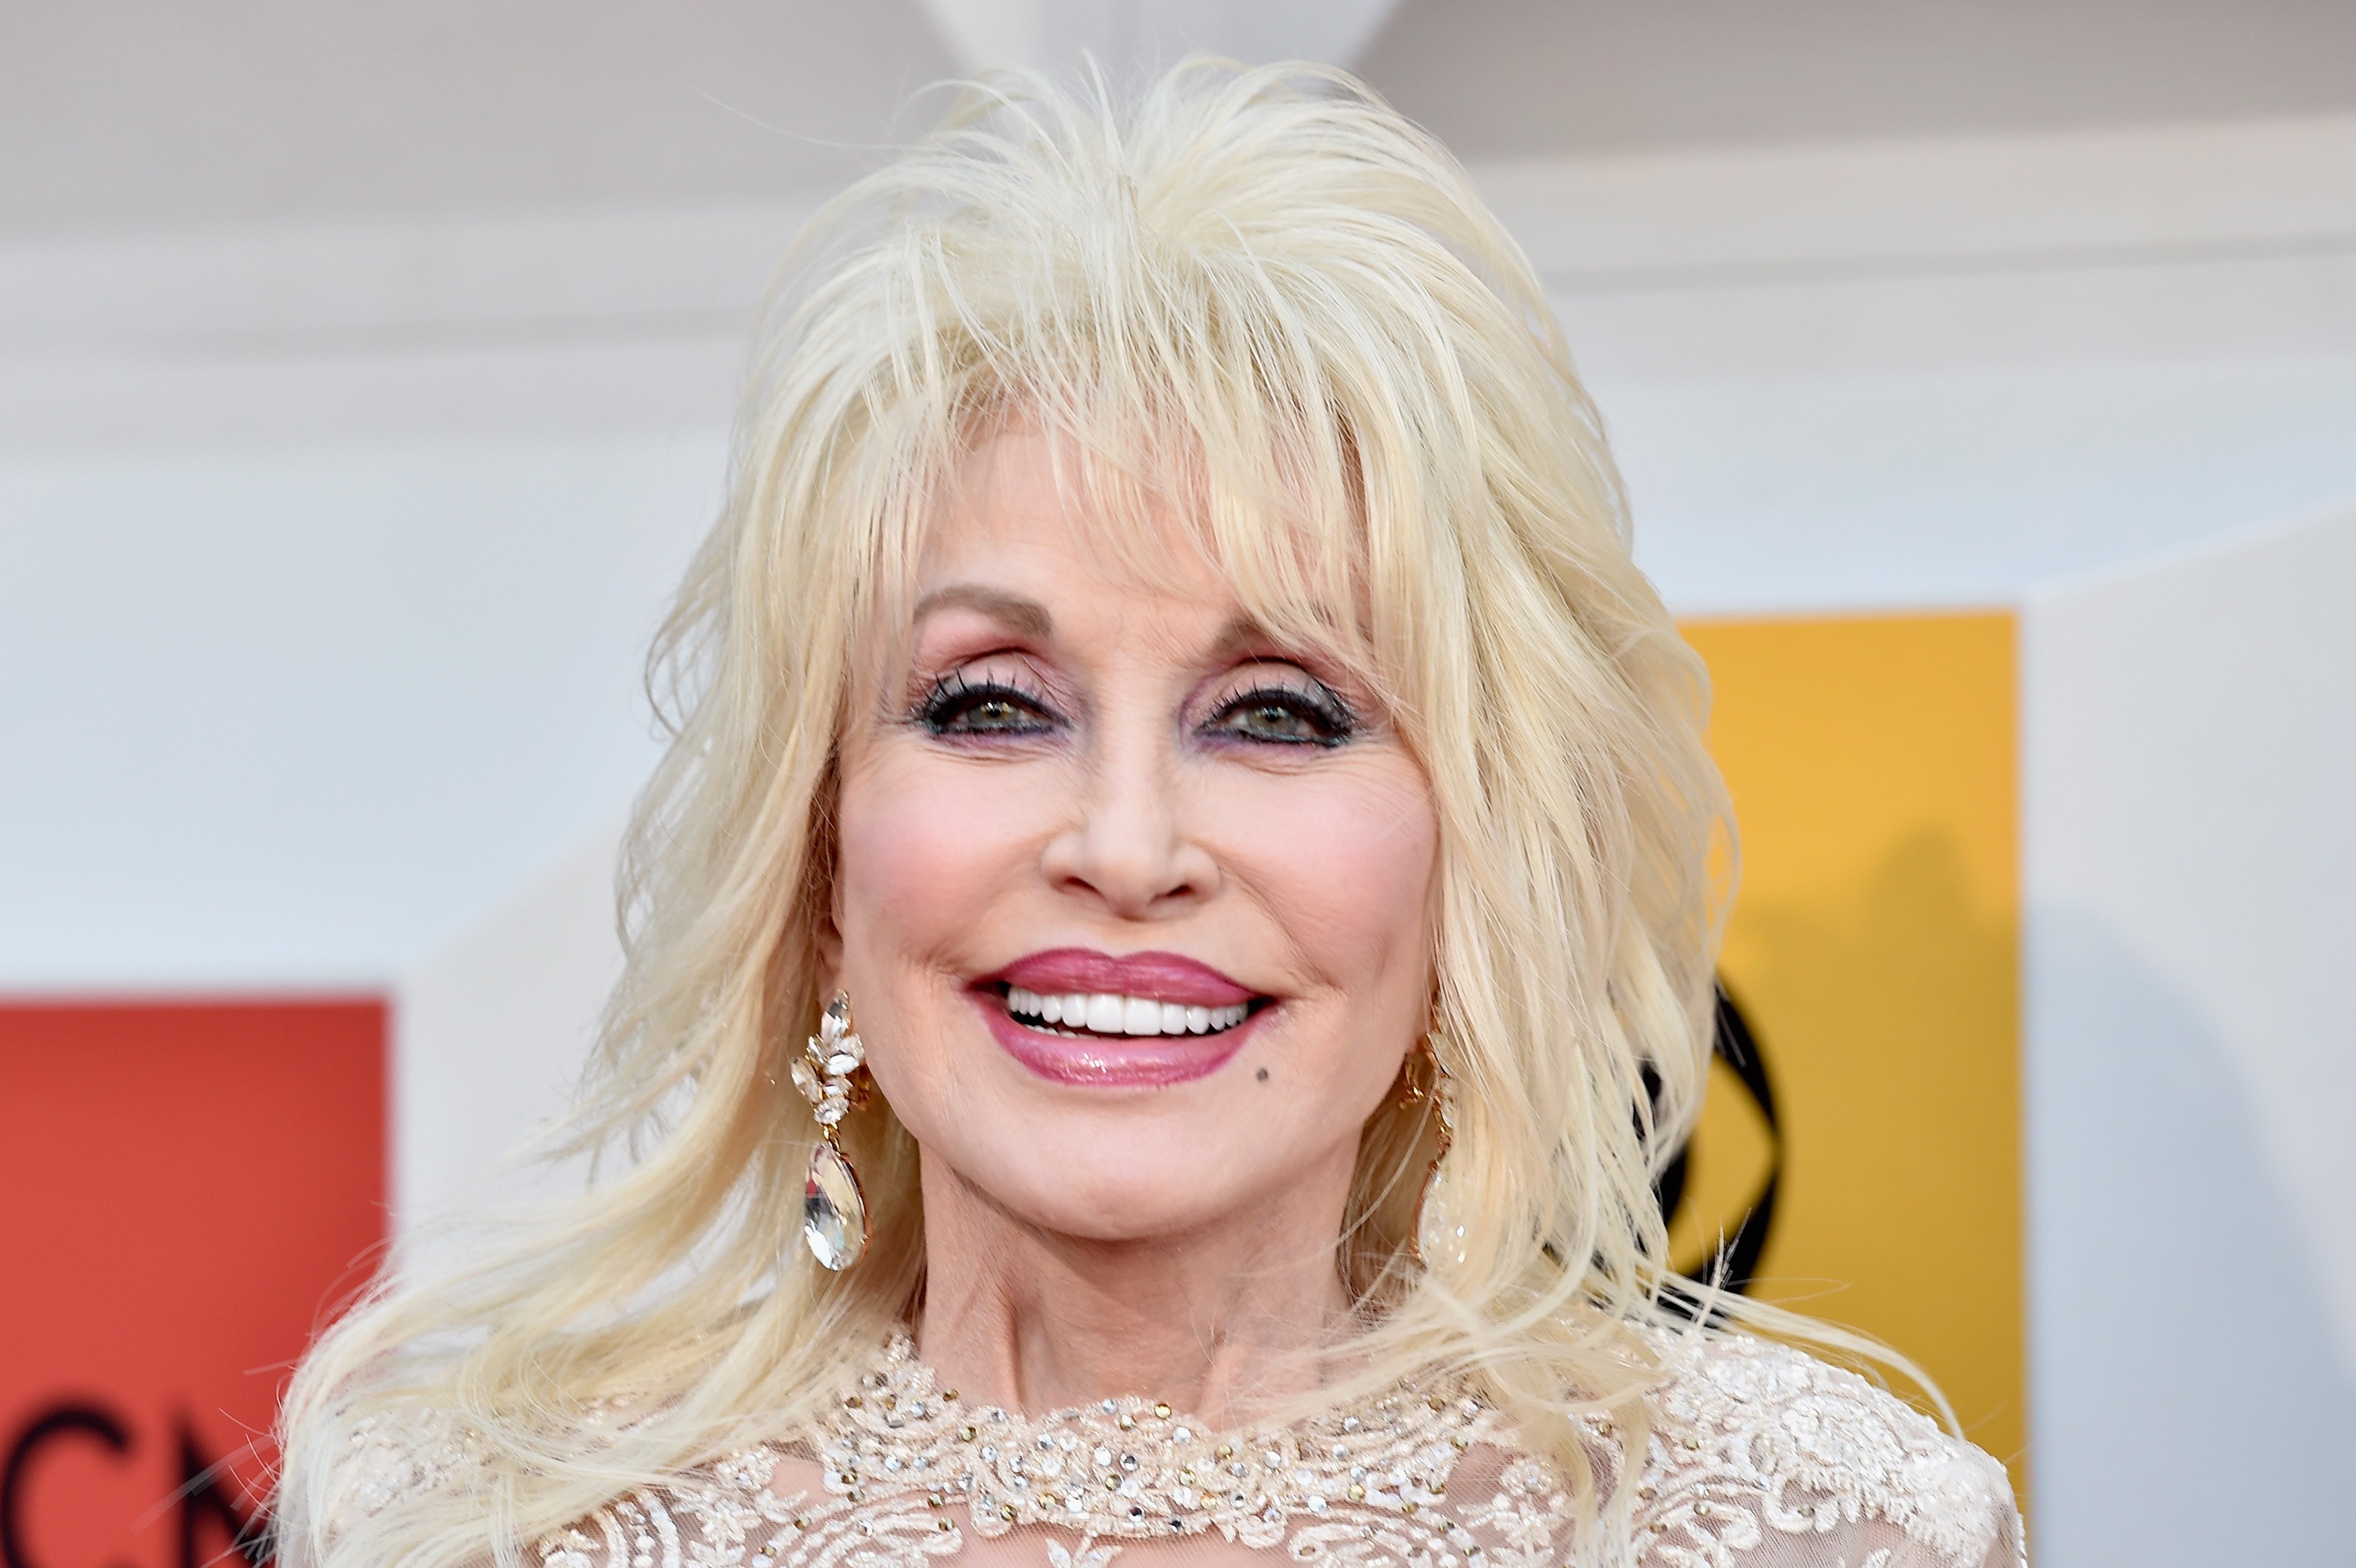 Dolly Parton wears a white dress at the 51st Academy of Country Music Awards at MGM Grand Garden Arena on April 3, 2016 in Las Vegas, Nevada.  